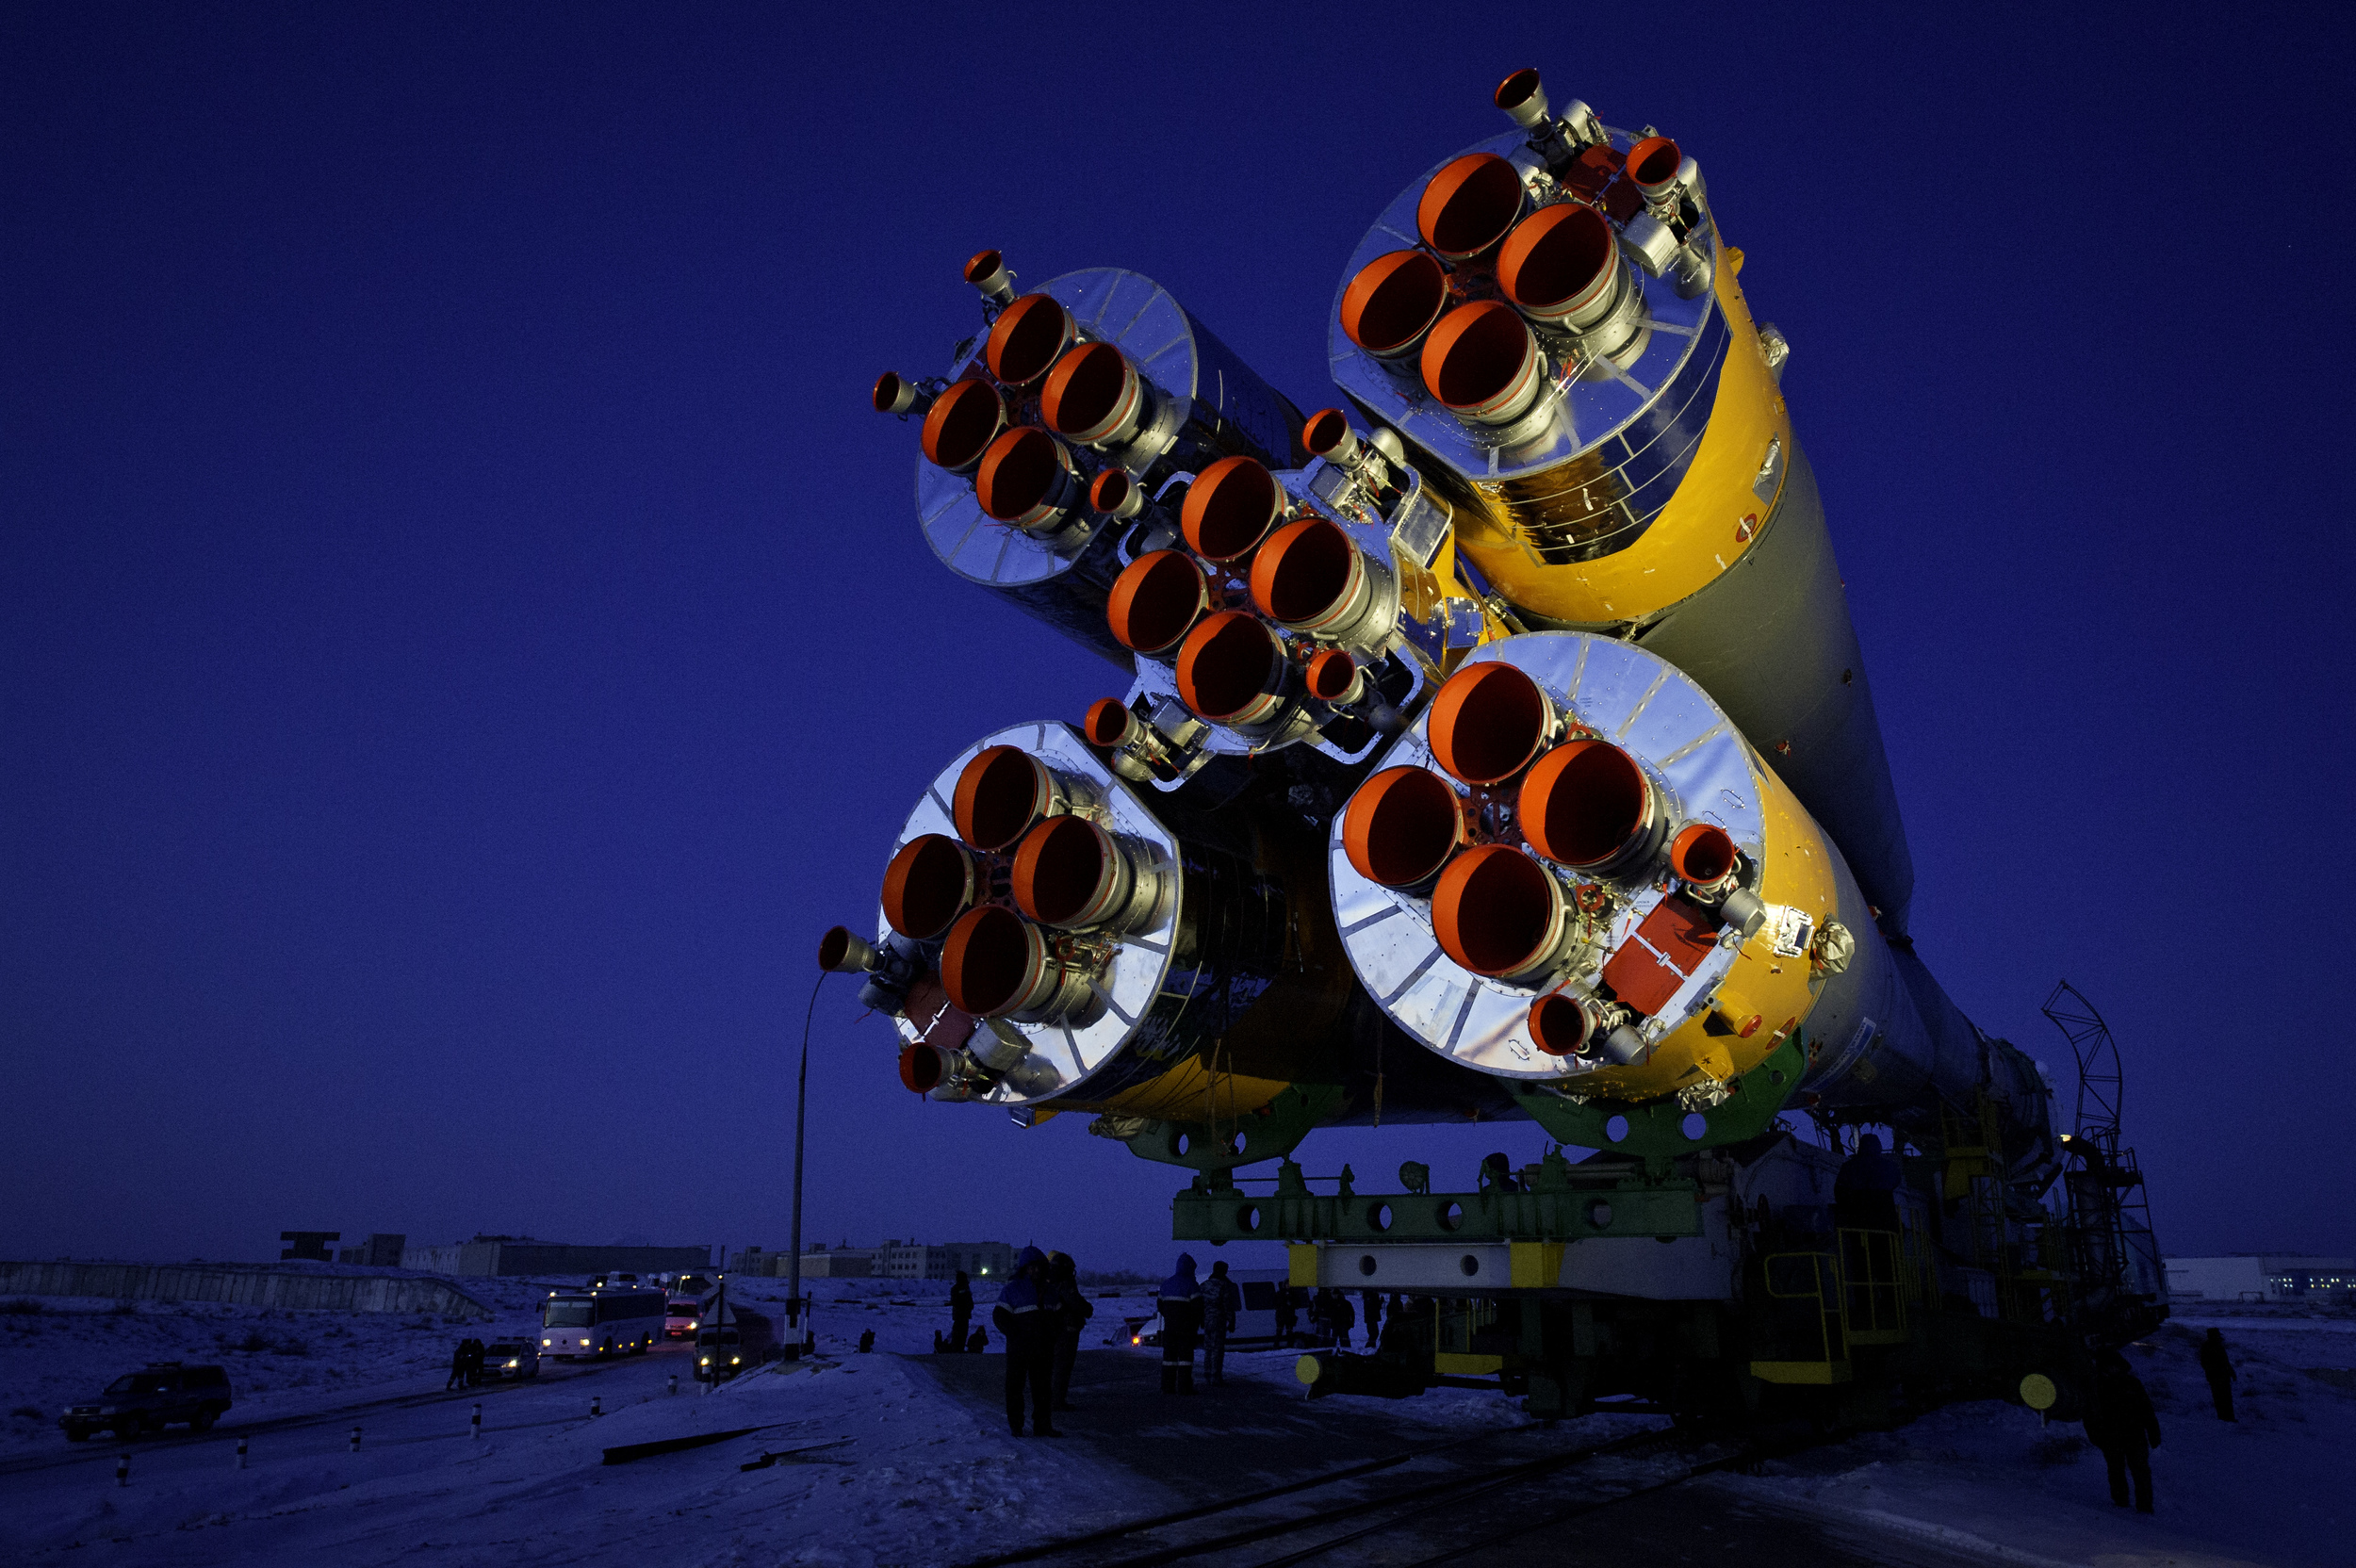  The Soyuz TMA-03M spacecraft is rolled out by train on its way to the launch pad at the Baikonur Cosmodrome, Kazakhstan, Monday, Dec. 19, 2011. The launch of the Soyuz spacecraft with Expedition 30 Soyuz Commander Oleg Kononenko of Russia, NASA Flig